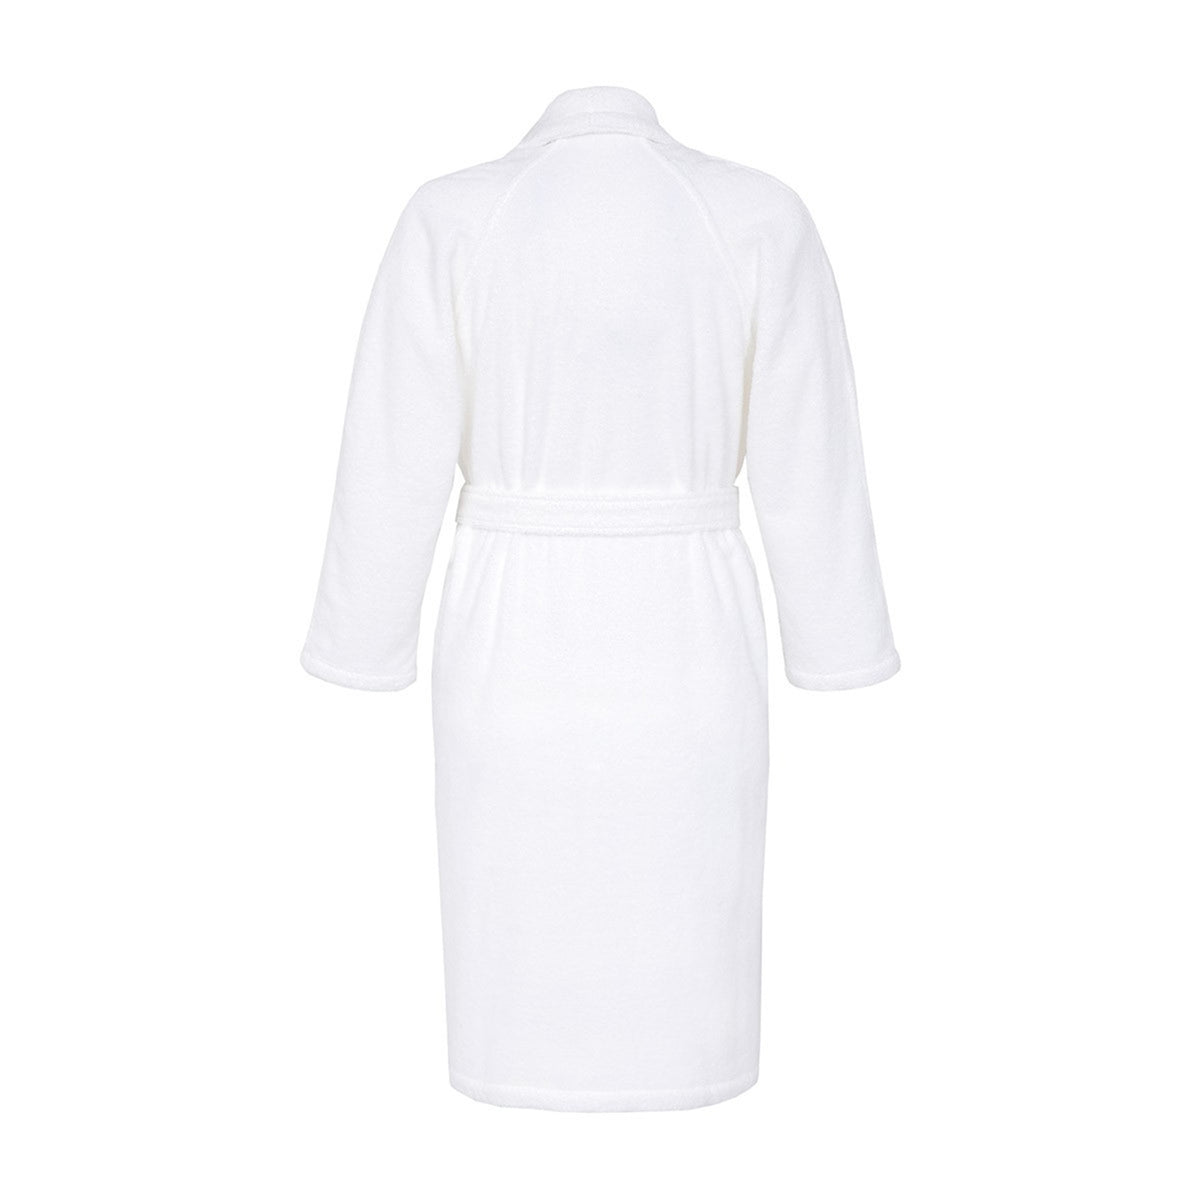 Back View of Yves Delorme Etoile Bath Robe in Blanc Color